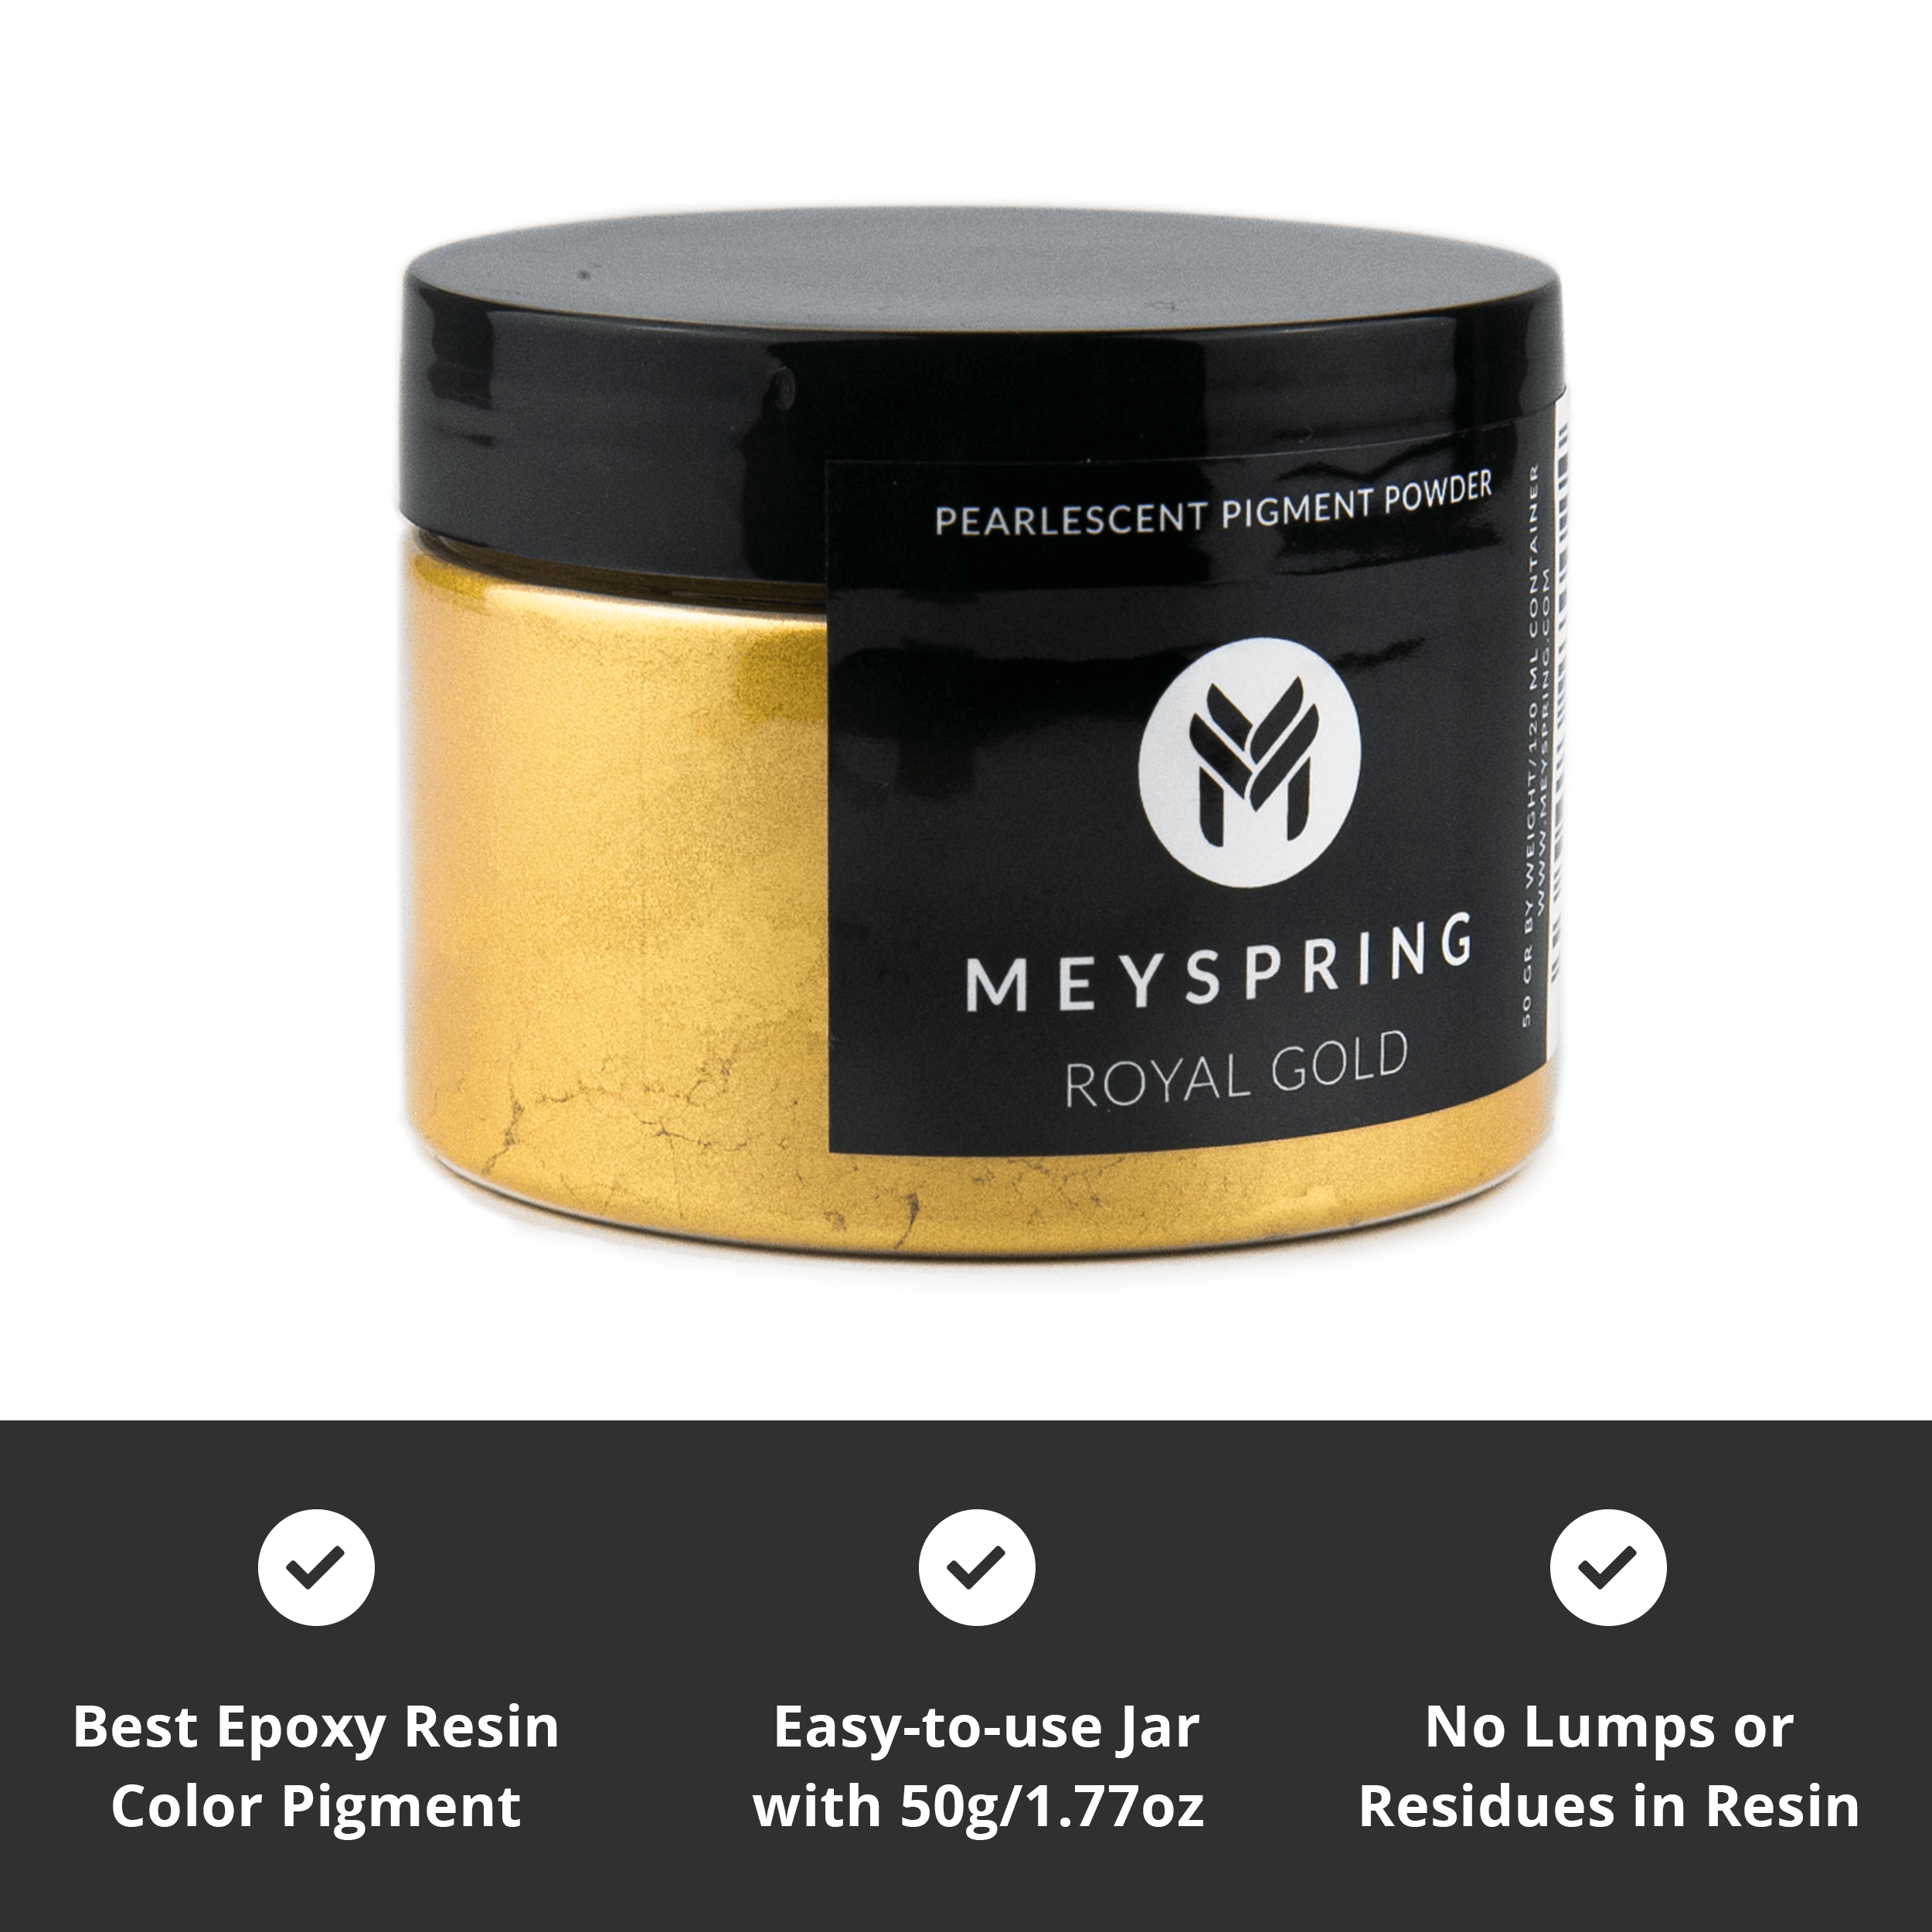 What can I use mica powder for? – MEYSPRING